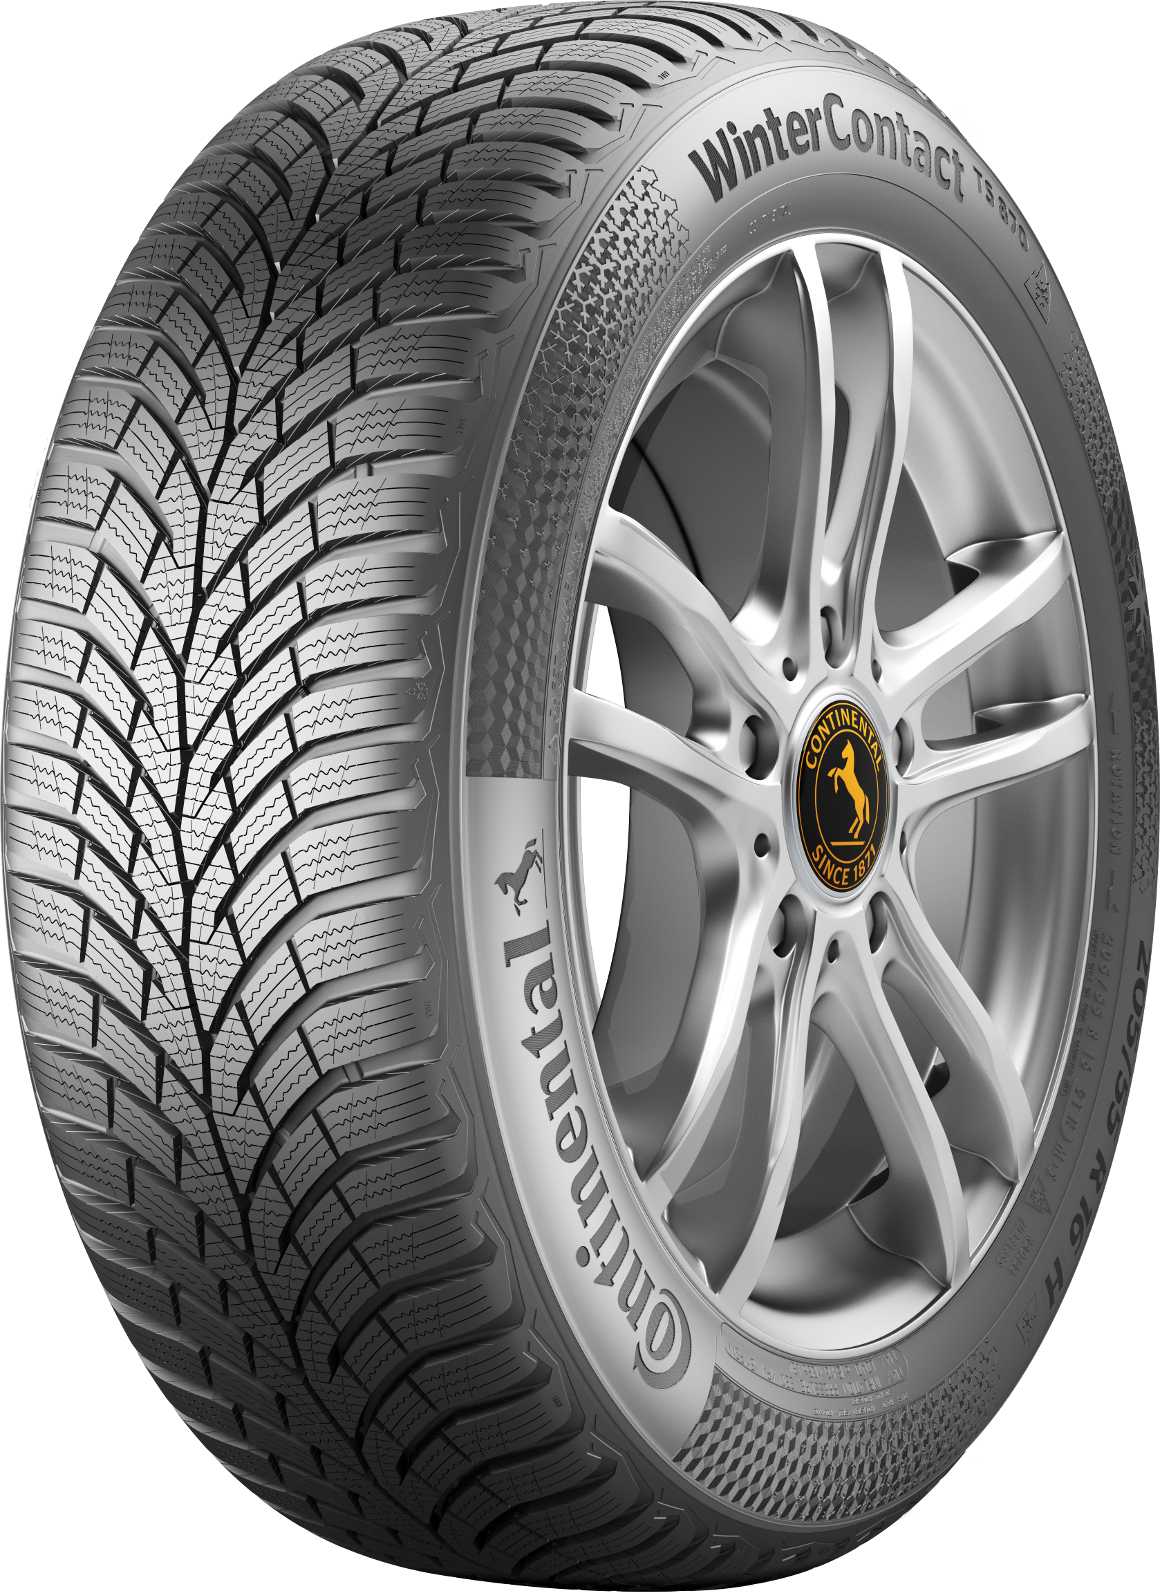    Continental Winter Contact TS870 195/55 R16 